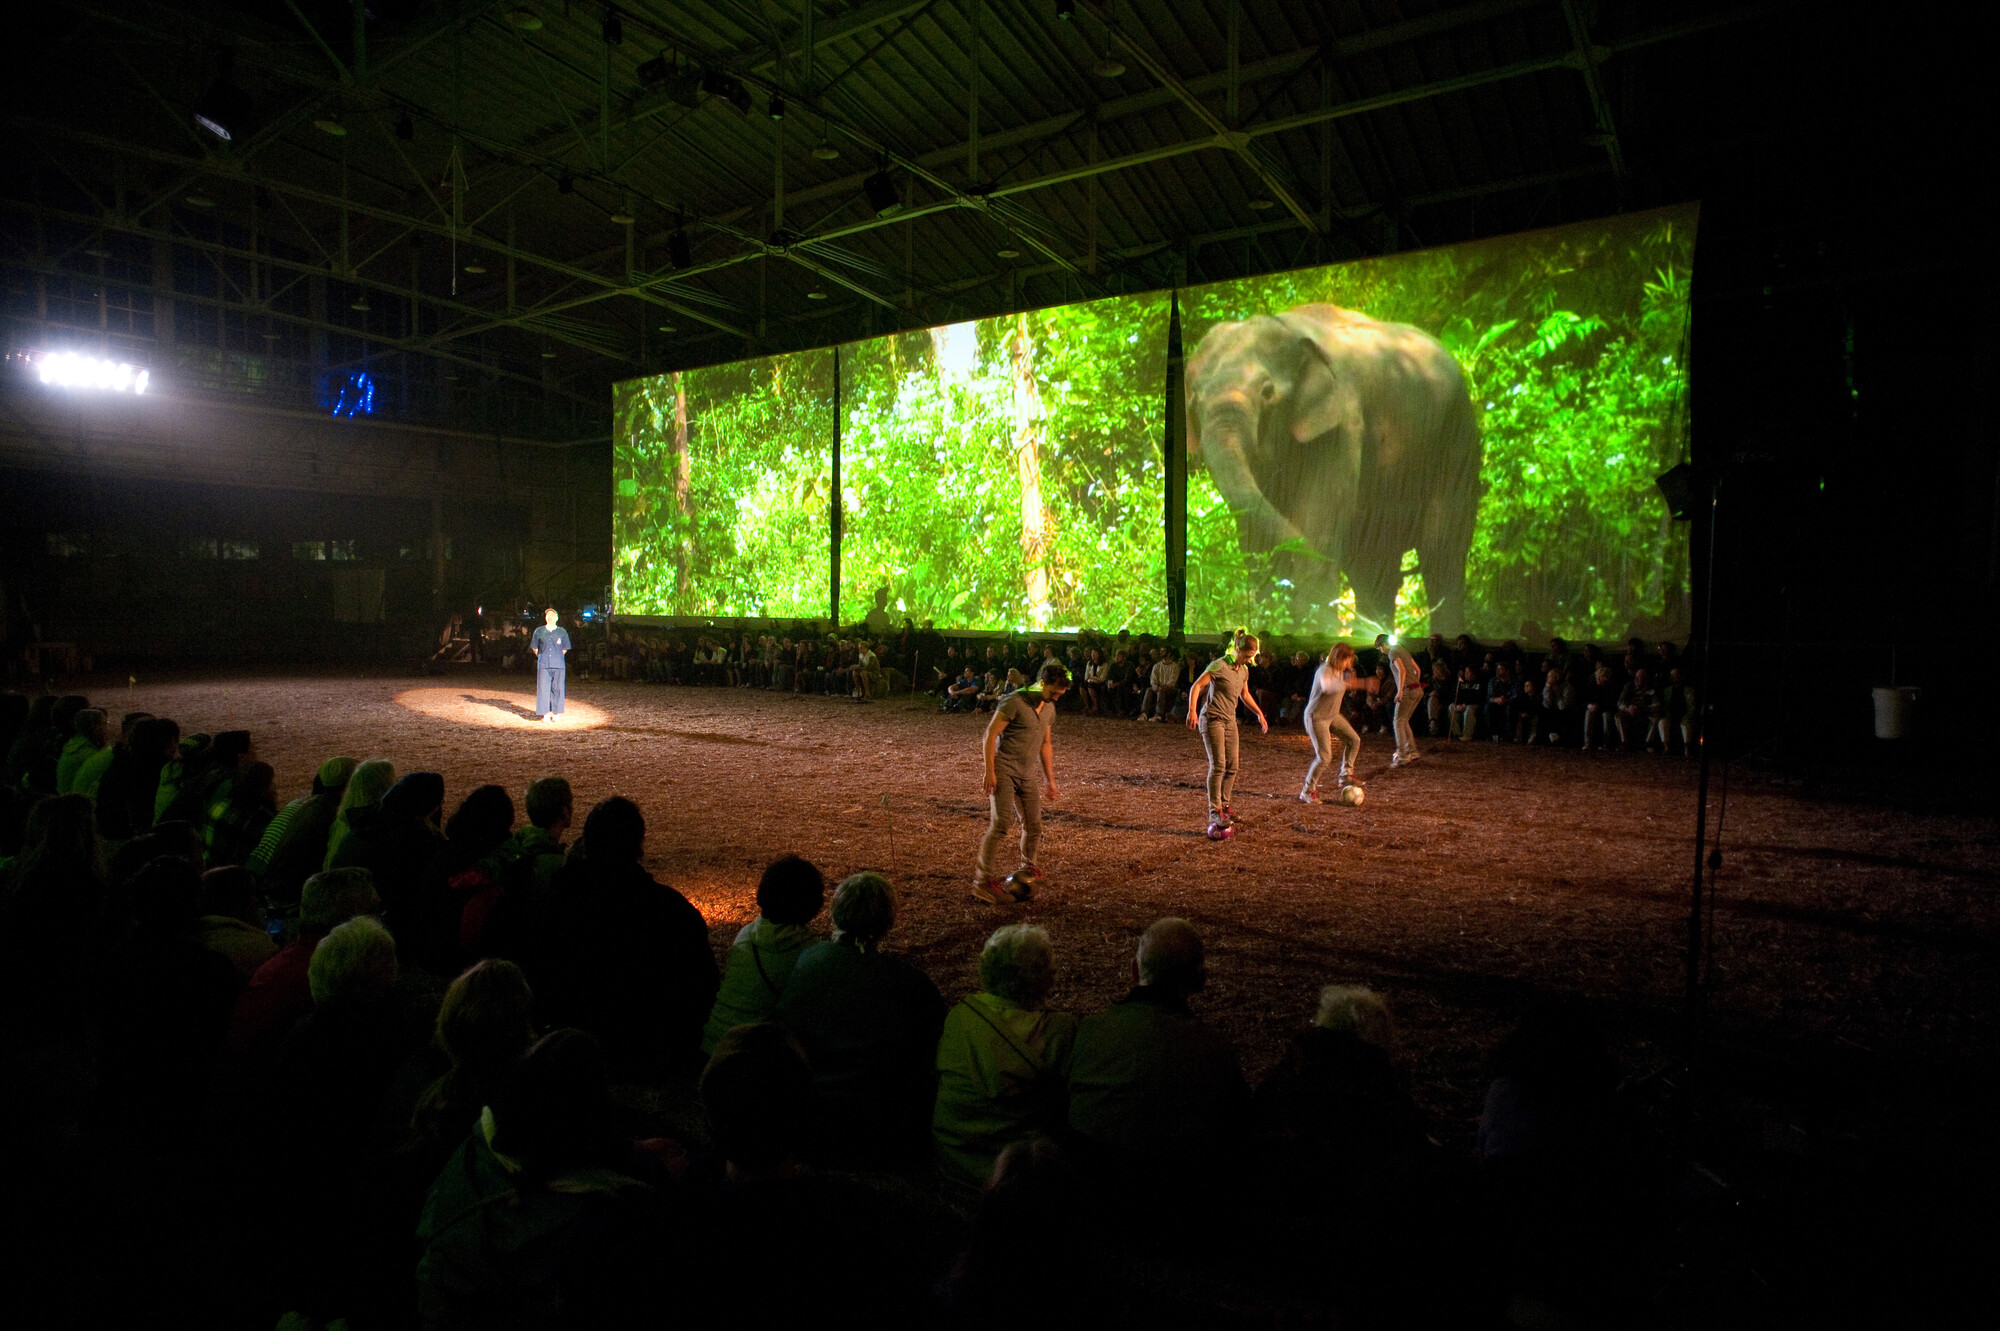 Performers spread out on a sand-covered stage with a screen projecting an image of an elephant in the background.